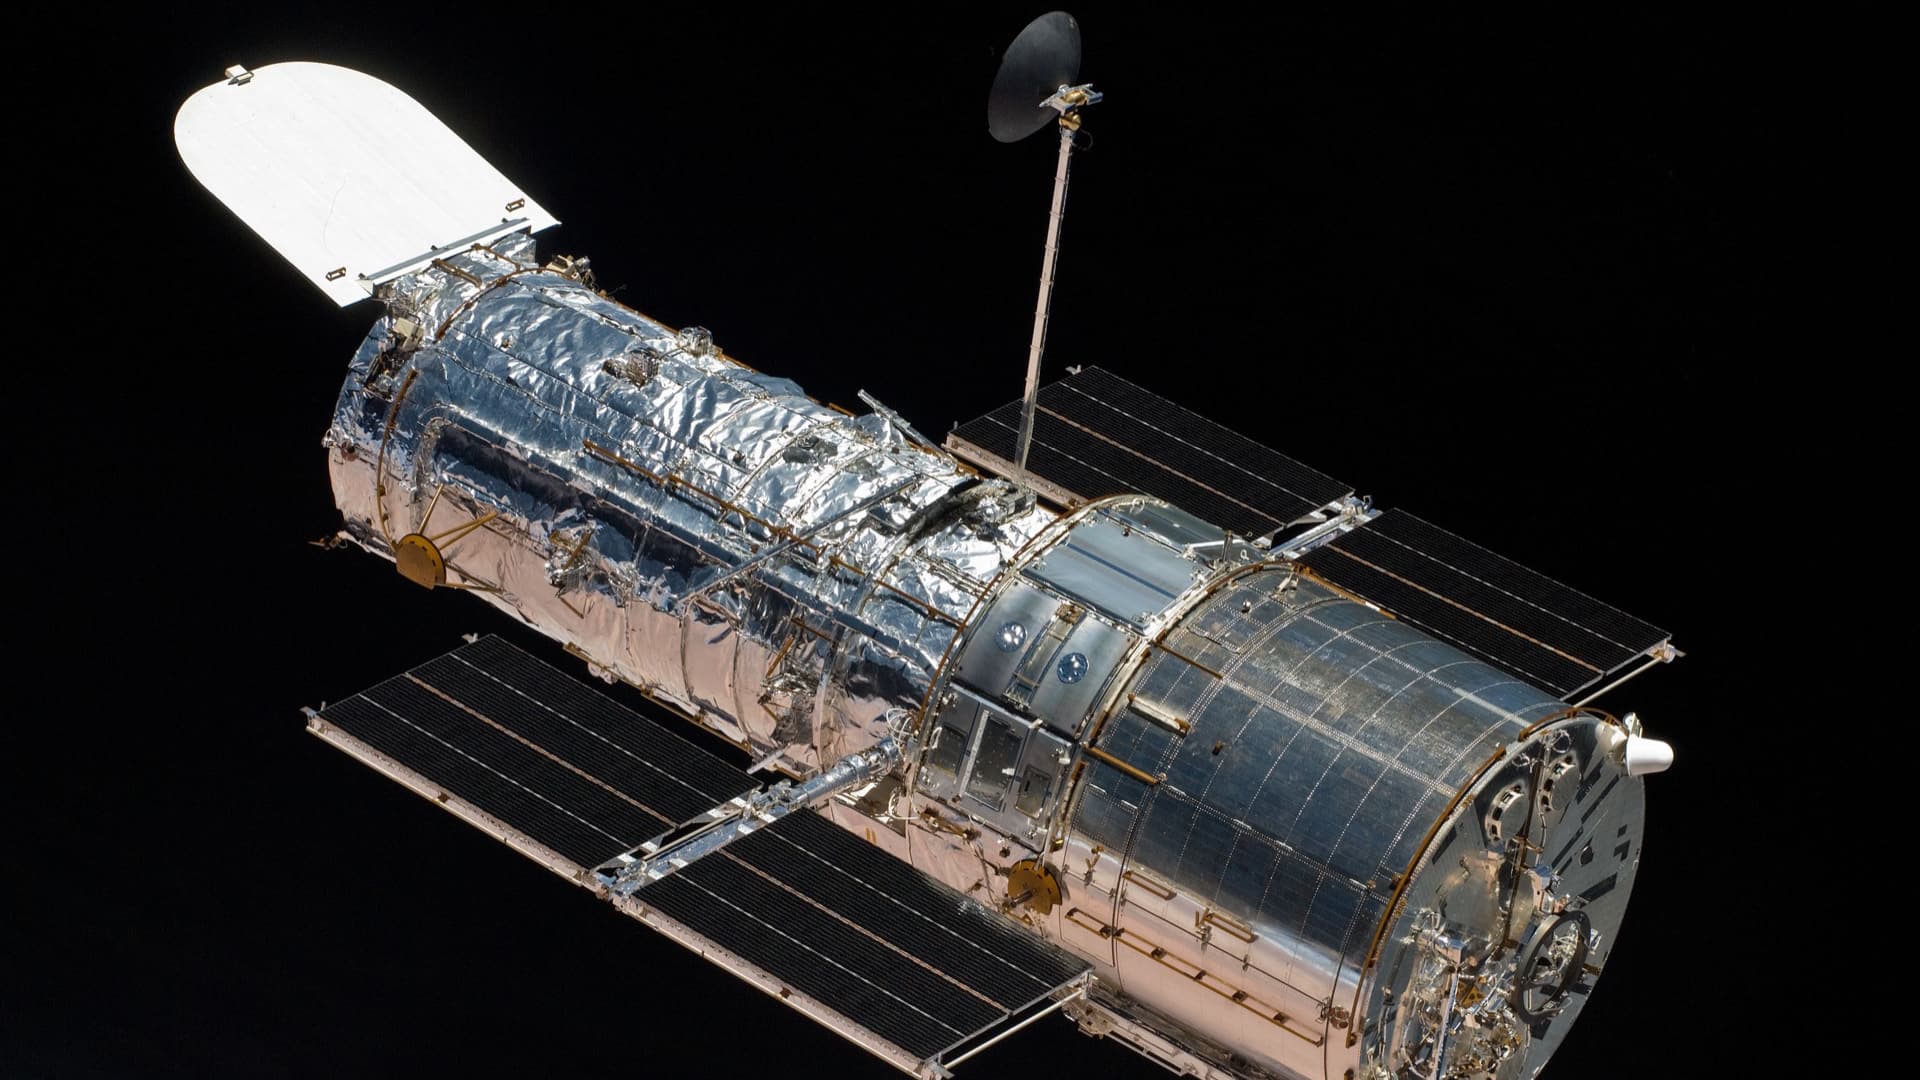 Hubble as seen from the 2009 Atlantis Shuttle mission. Pic: NASA